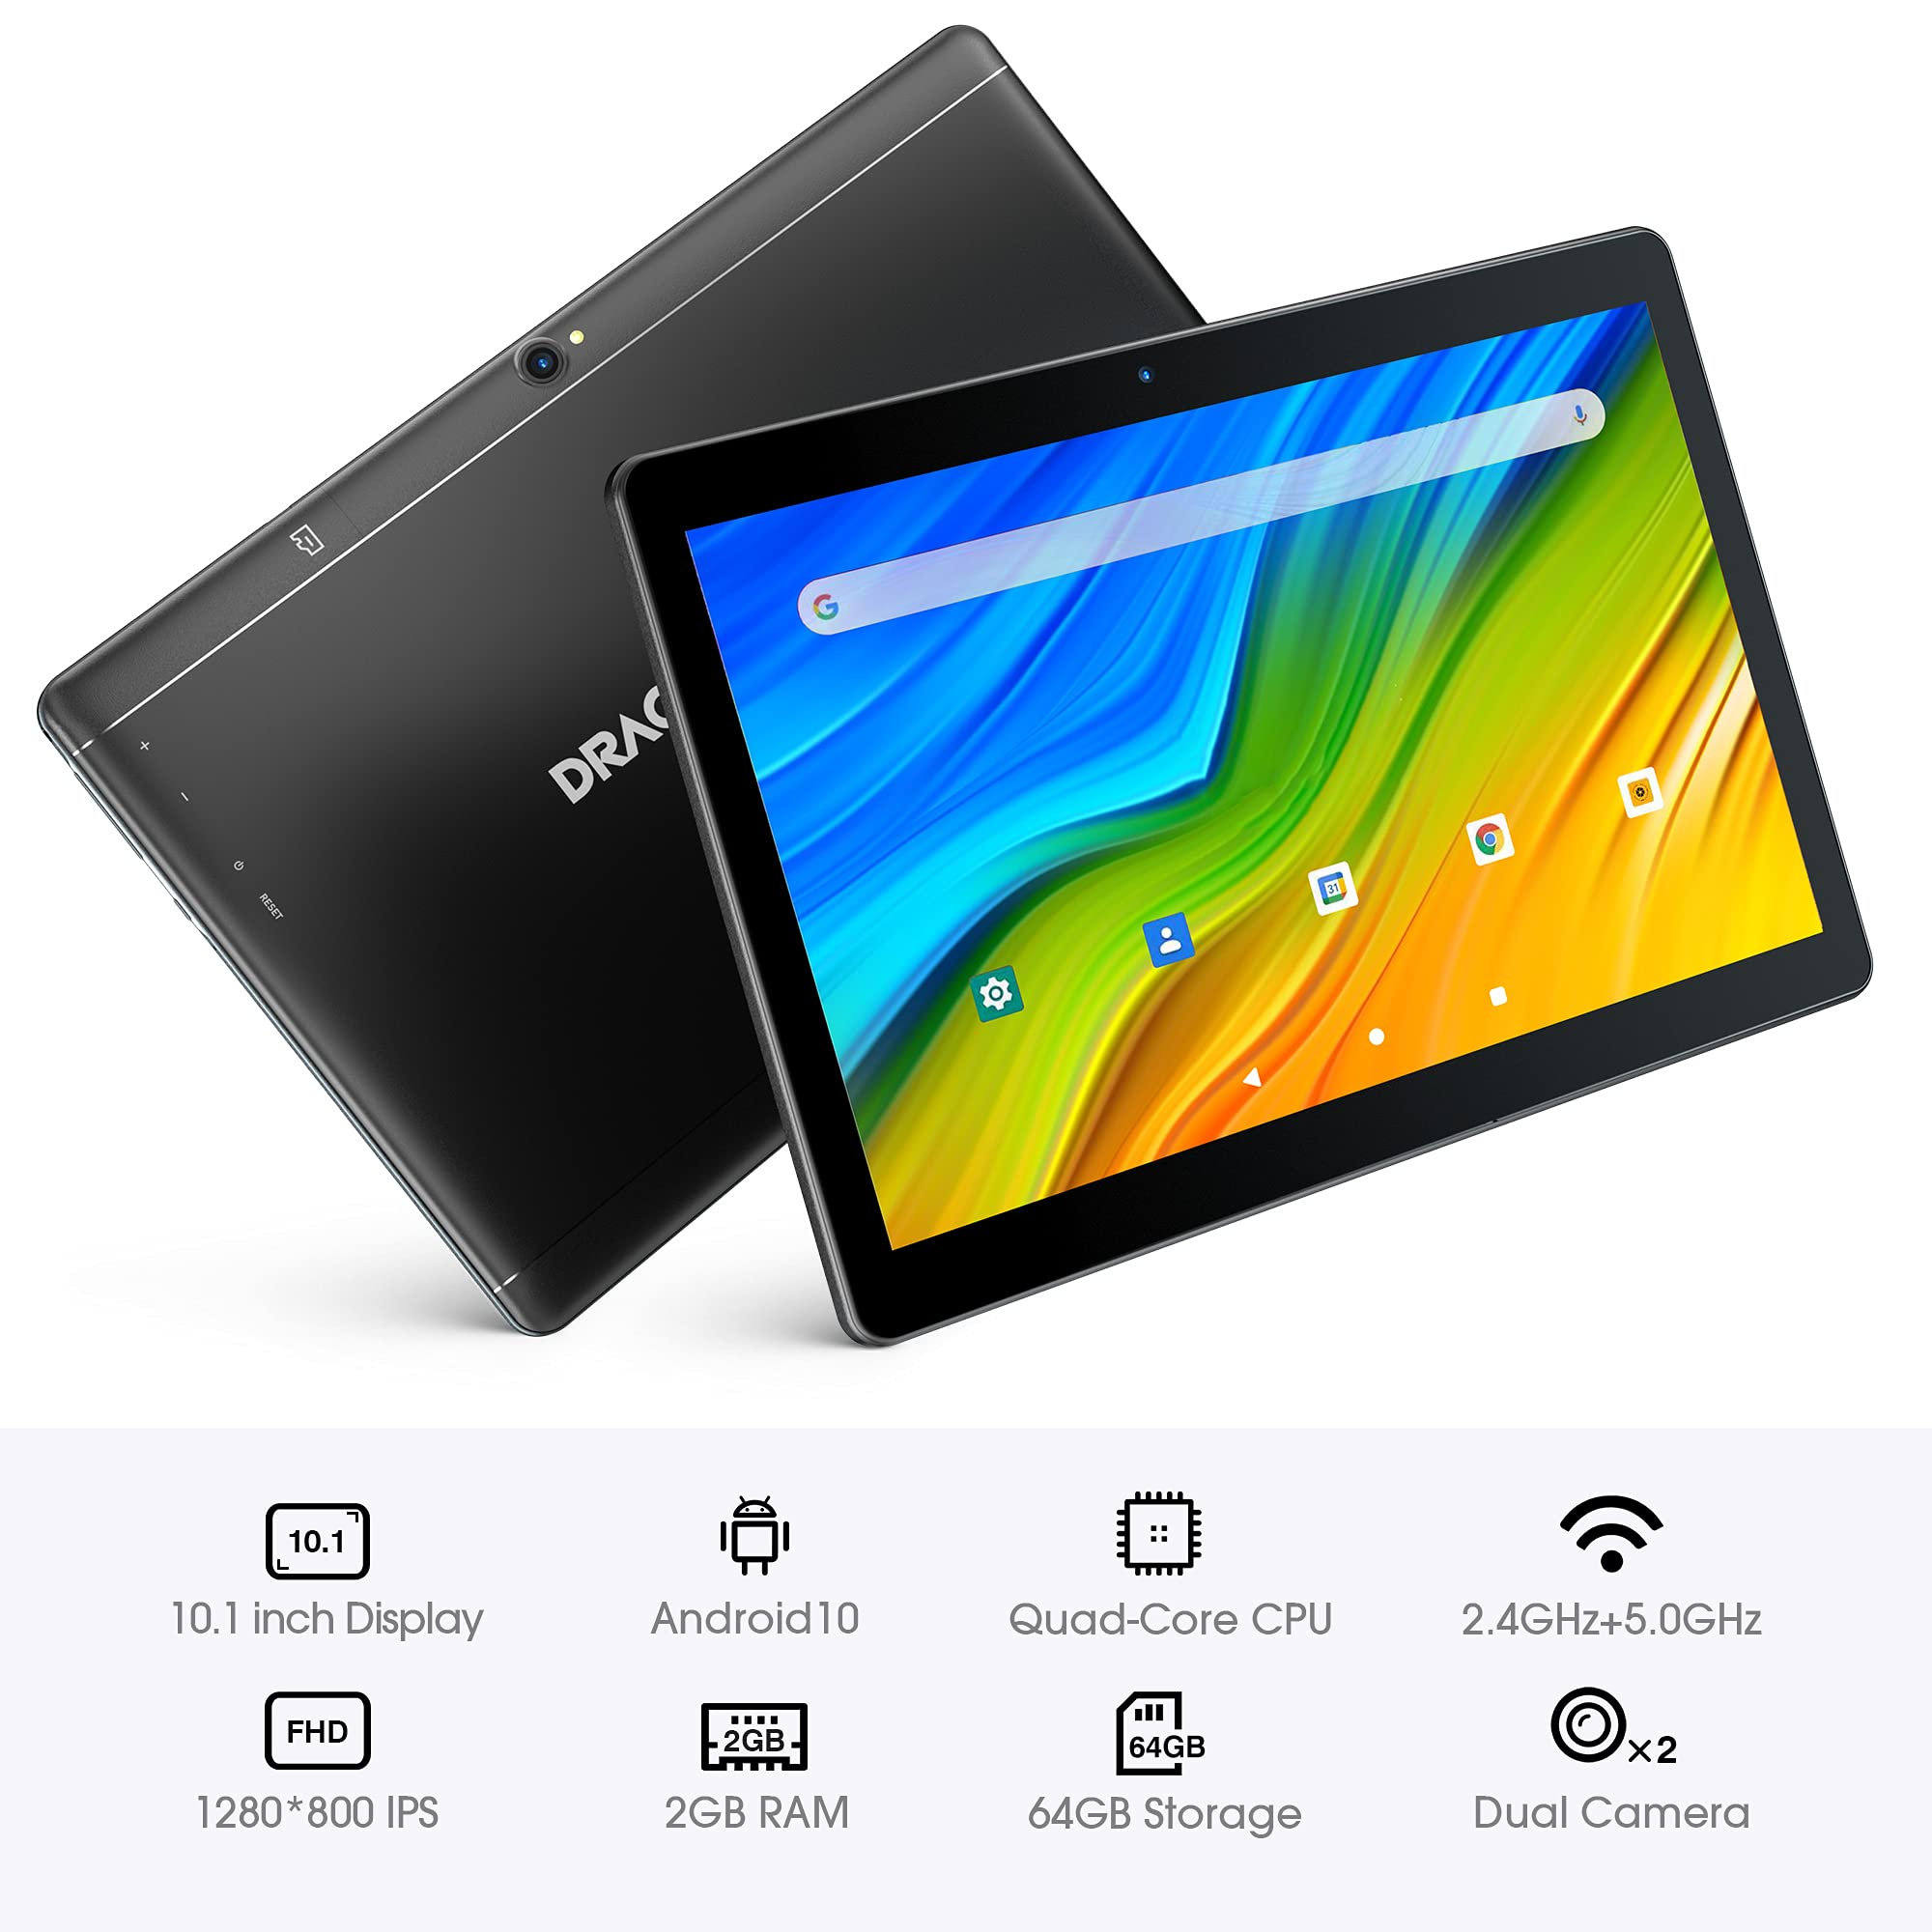 Dragon Touch Notepad K10 Tablet with 64 GB Storage, 256GB Expandable Storage, 10 inch Android Tablet, Quad Core Processor, 1280 x 800 IPS HD Display, Micro HDMI, GPS, FM, 5G WiFi